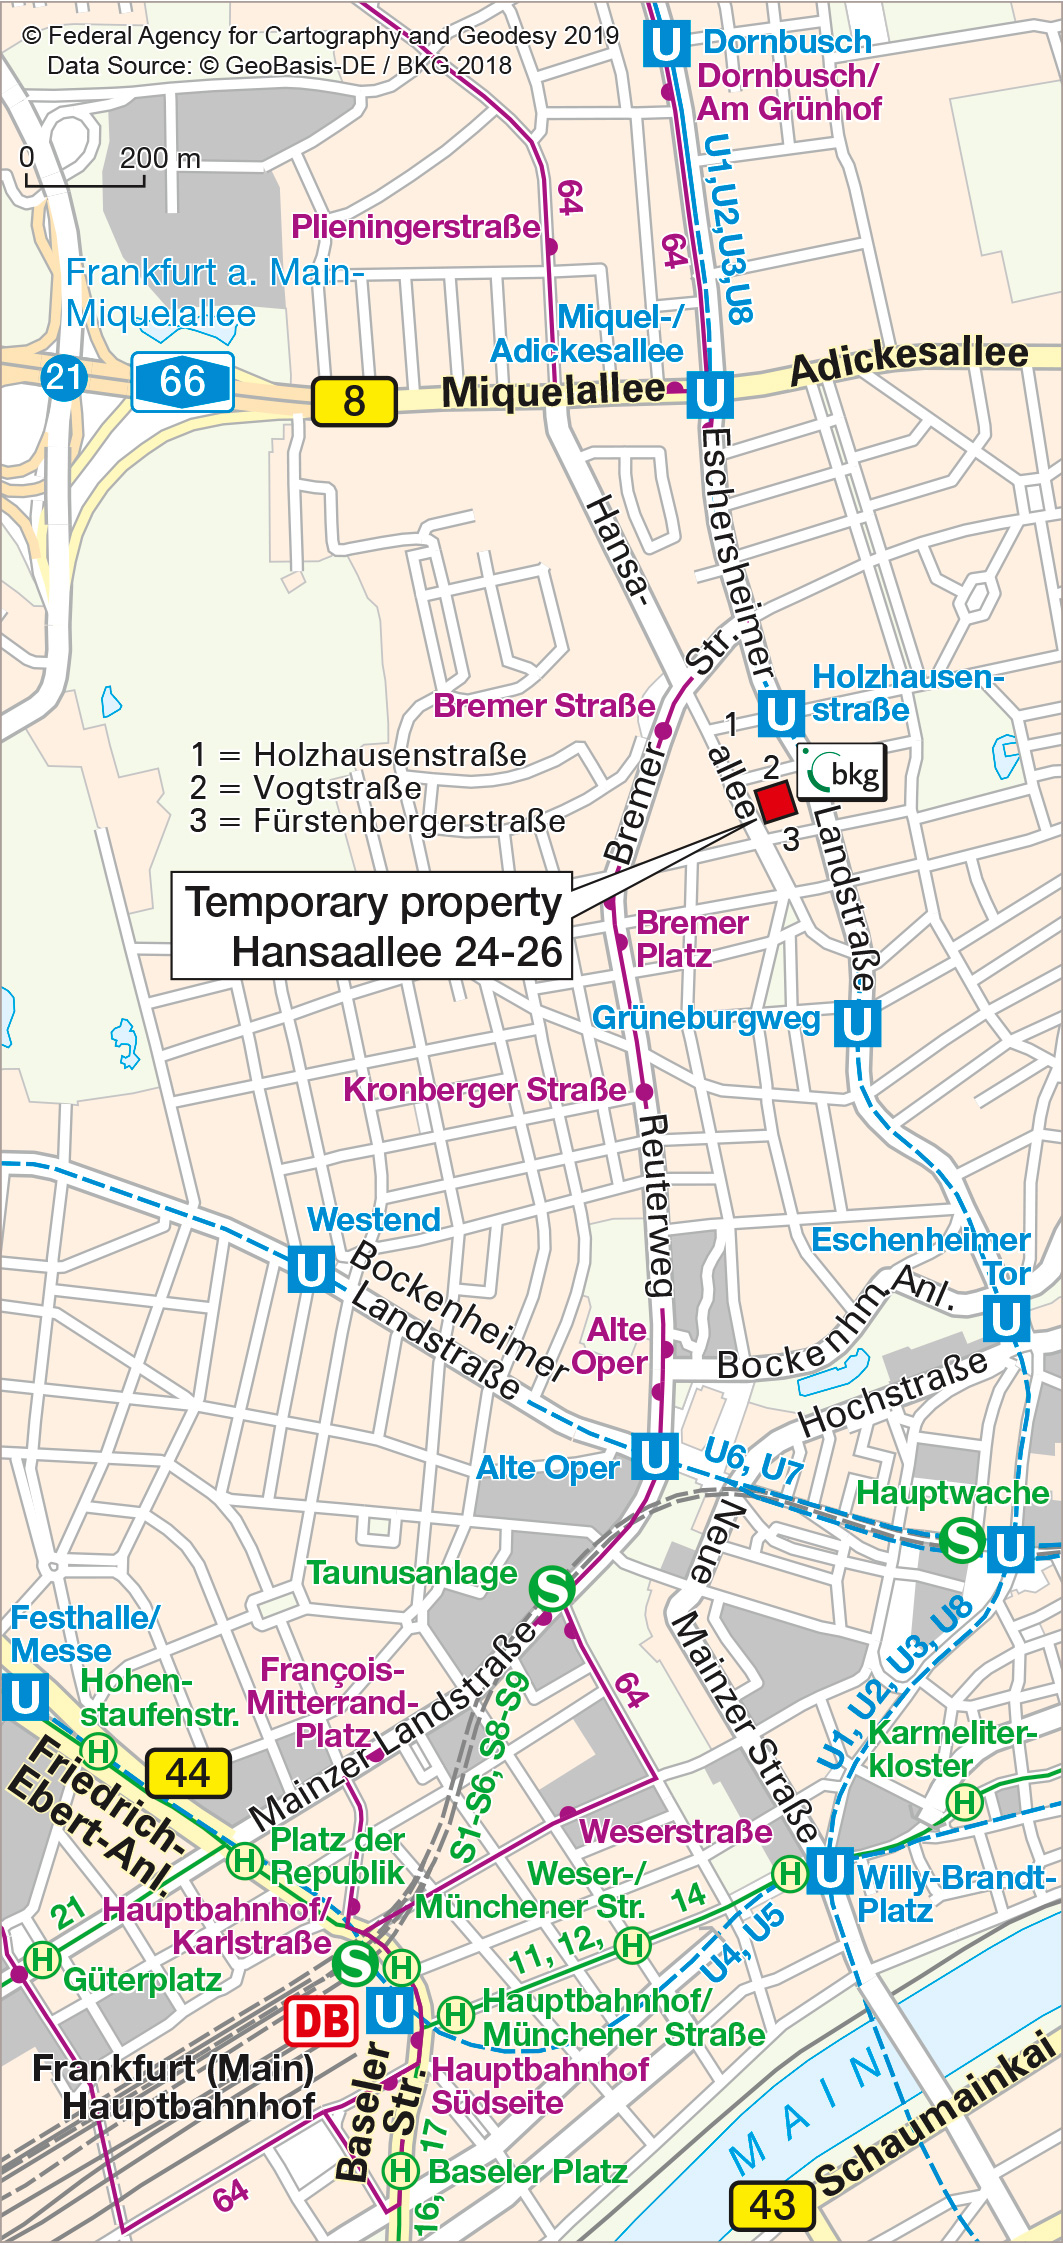 Image shows the location of the temporary property Hansaallee on a detail map